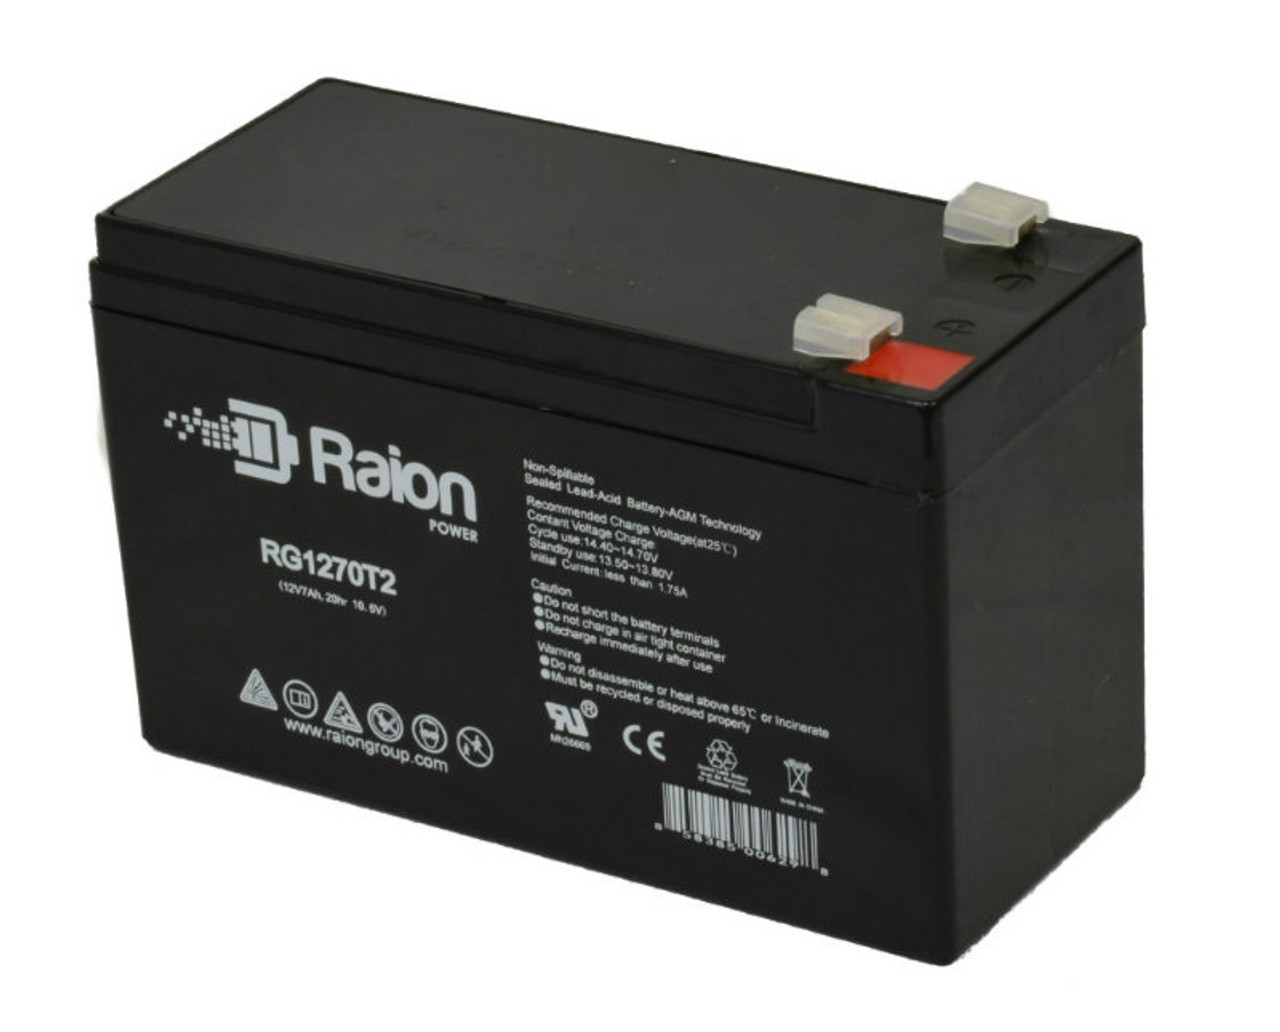 Raion Power RG1270T1 12V 7Ah Non-Spillable Replacement Battery for Universal Power UB1272 (40760)